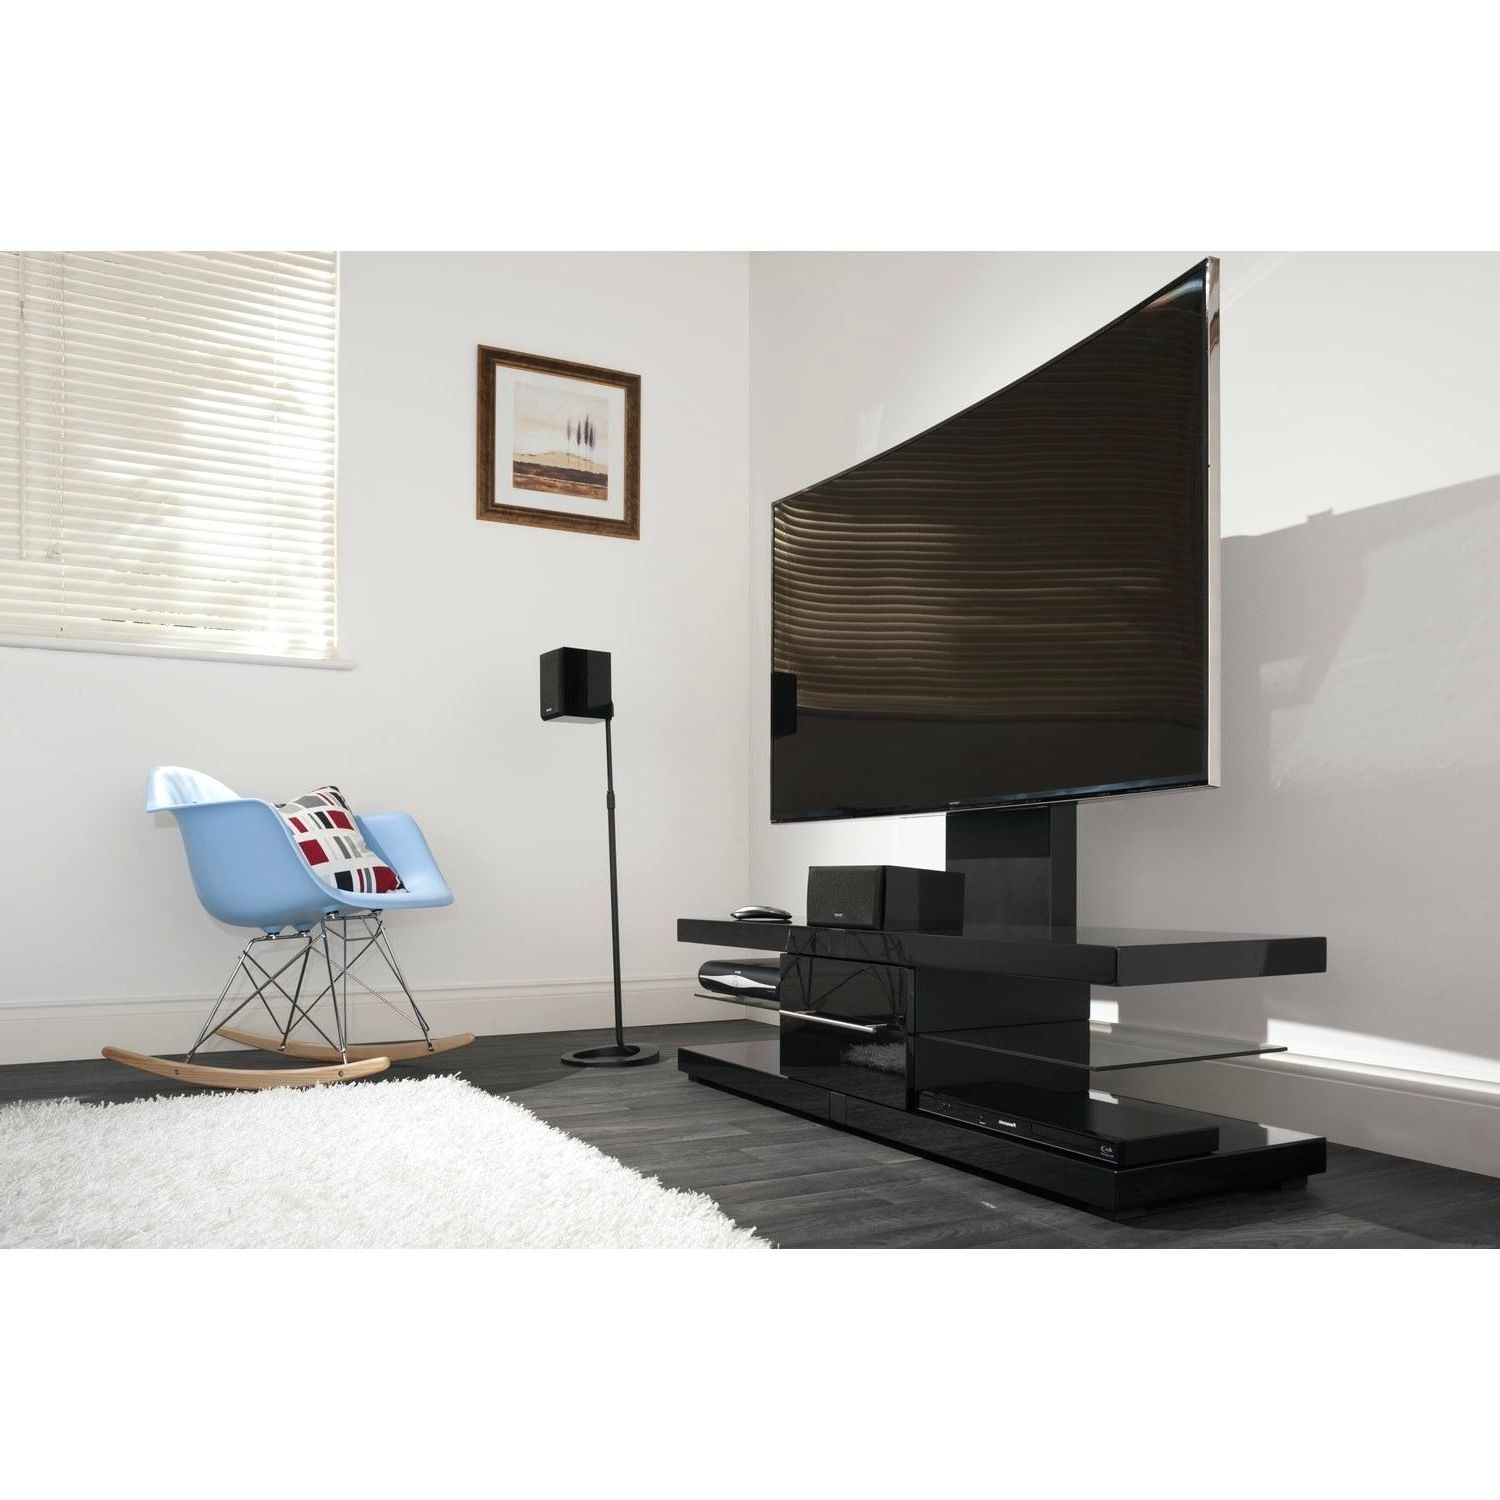 Top 20 of Techlink Panorama Walnut Tv Stands